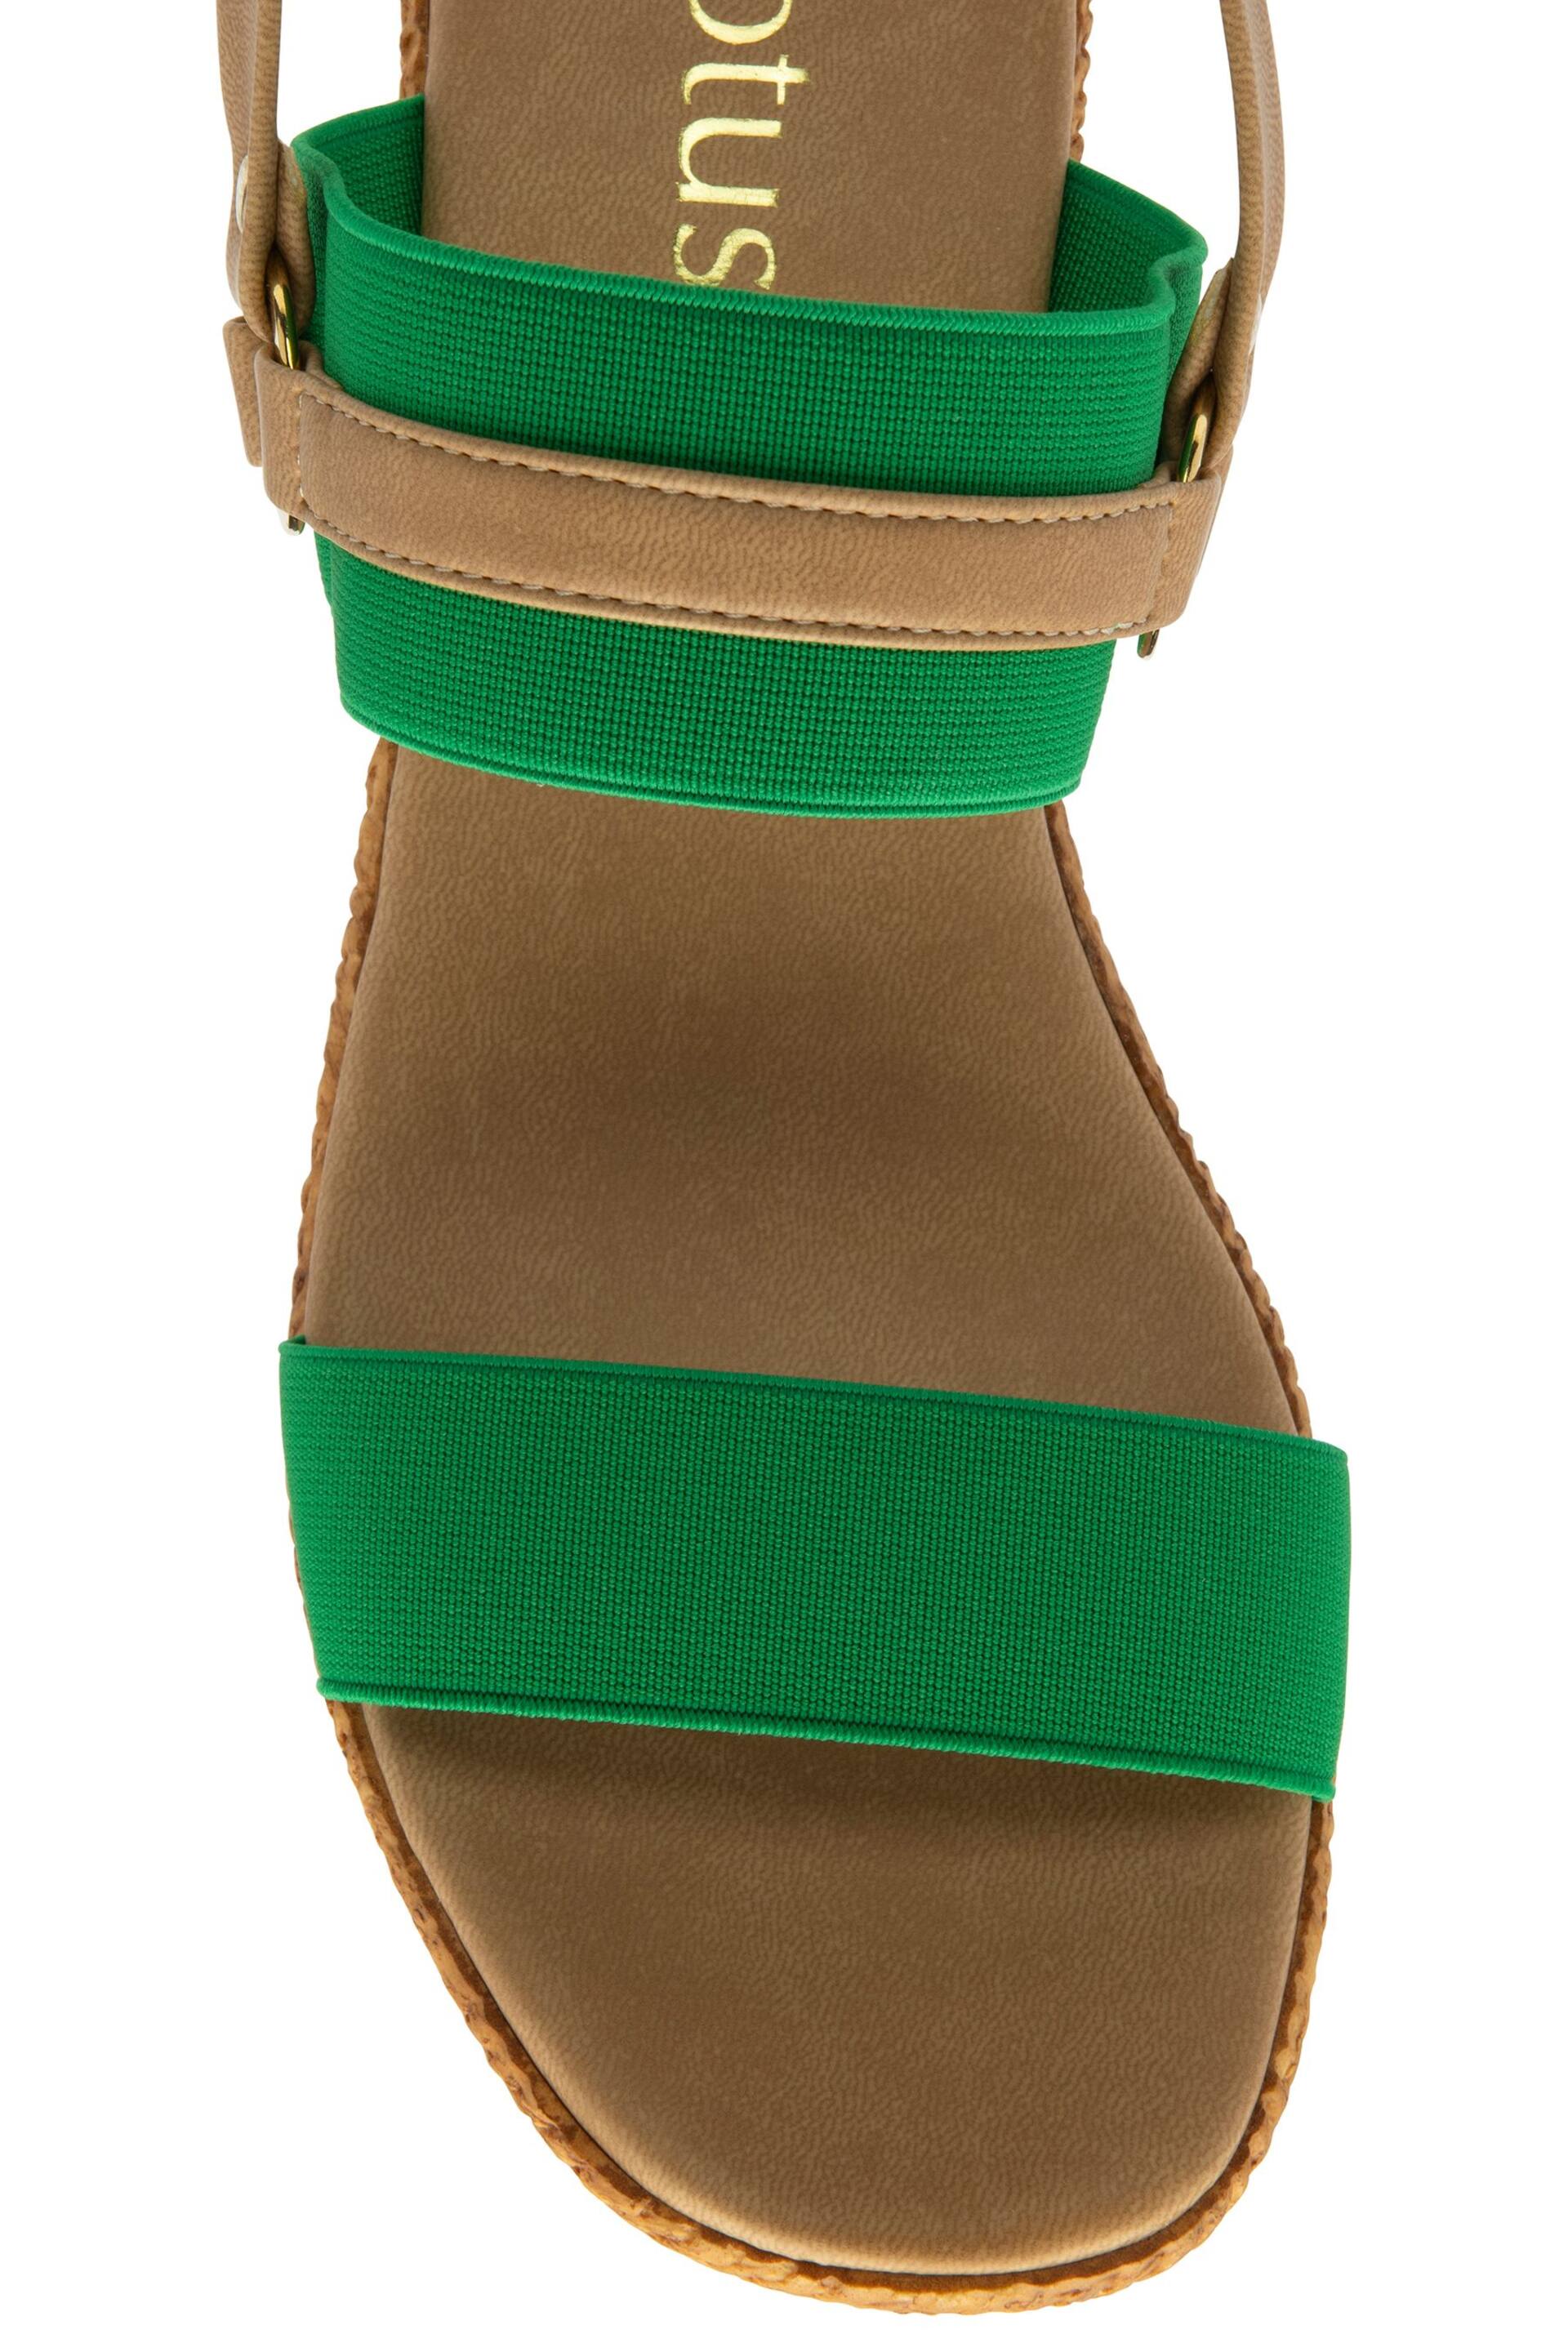 Lotus Green Open-Toe Wedge Sandals - Image 4 of 4